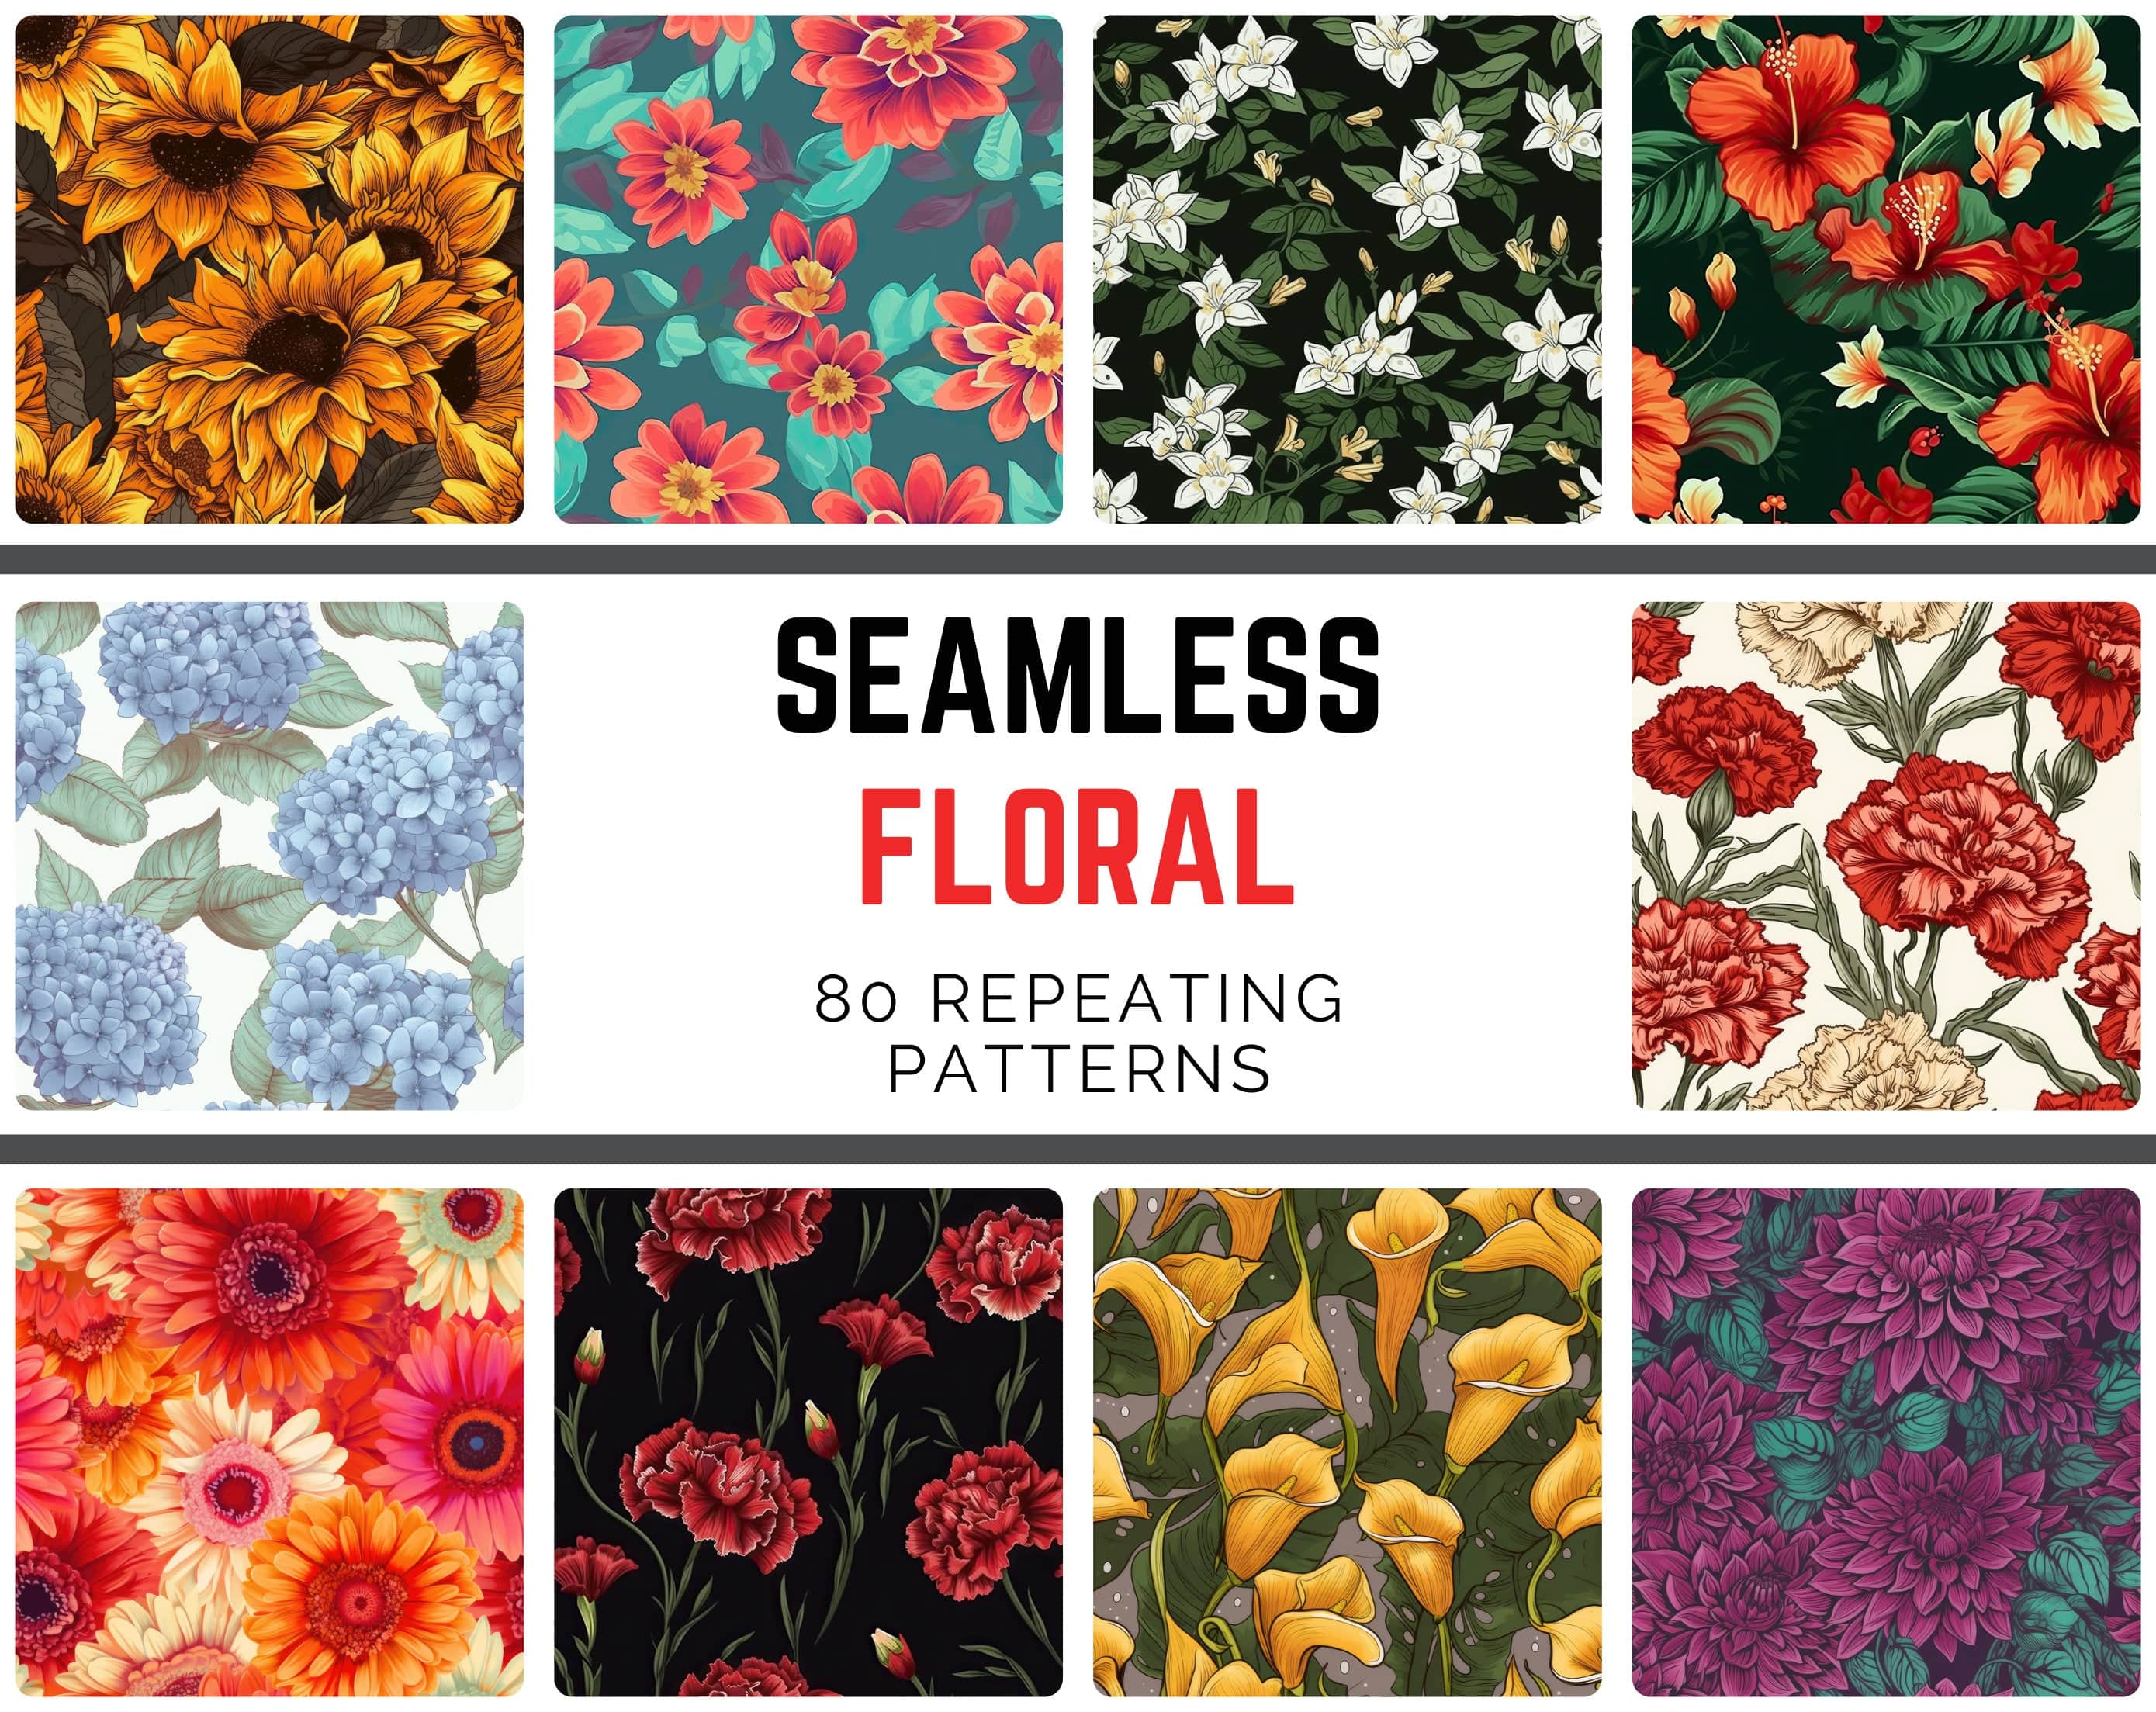 Floral Seamless Patterns Bundle - 80 Beautiful High-Quality Digital Flower Designs for DIY Projects, Crafts & Decor, Repeating patterns Digital Download Sumobundle